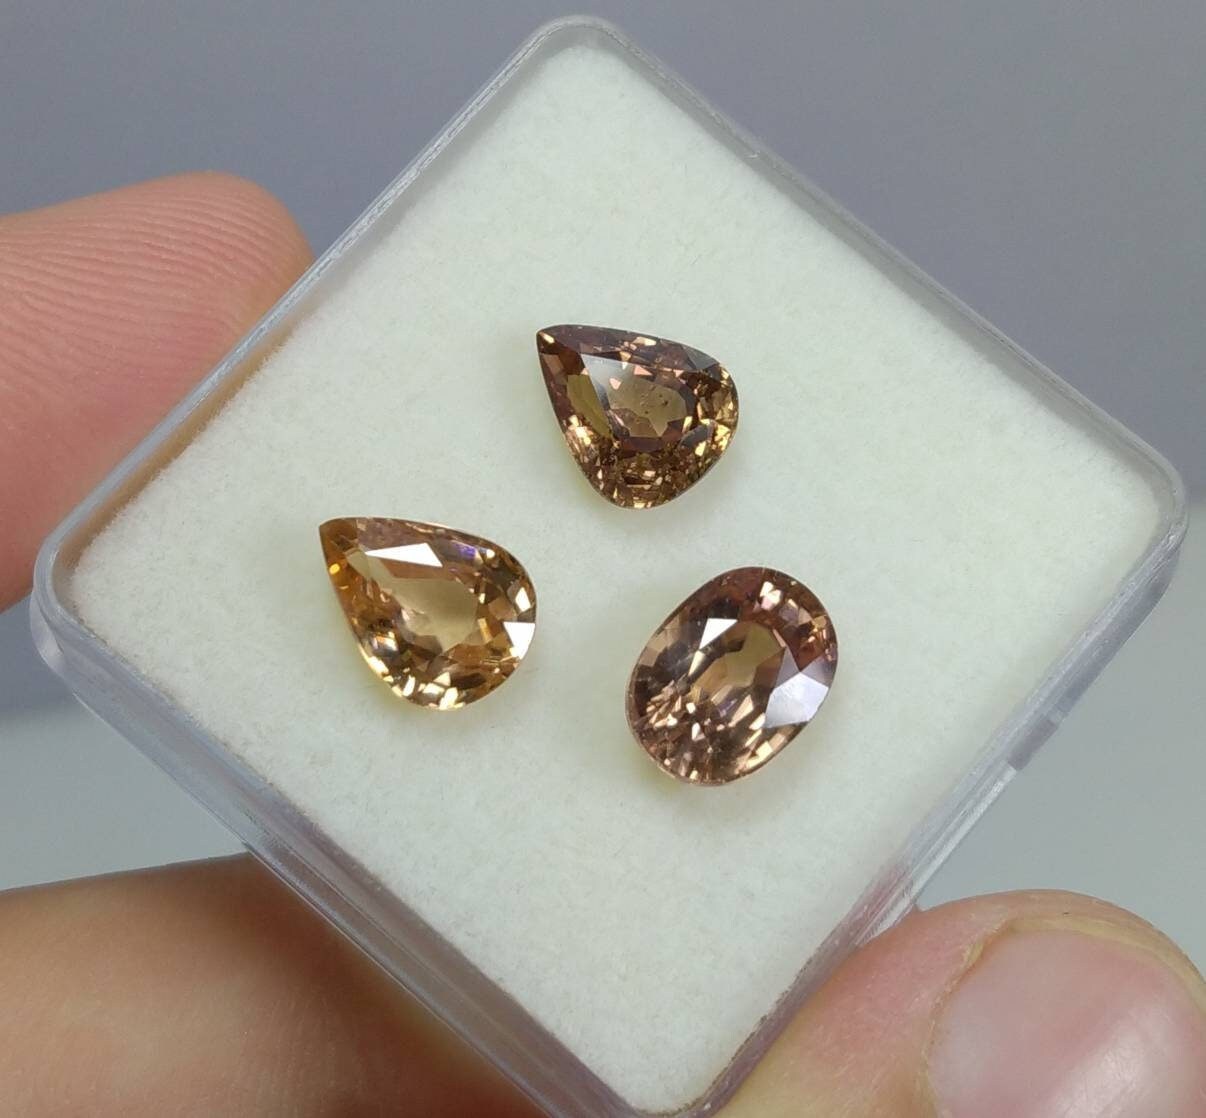 ARSAA GEMS AND MINERALSNatural top quality beautiful 10 carats Small sized set of faceted VV clarity zircon gems - Premium  from ARSAA GEMS AND MINERALS - Just $50.00! Shop now at ARSAA GEMS AND MINERALS